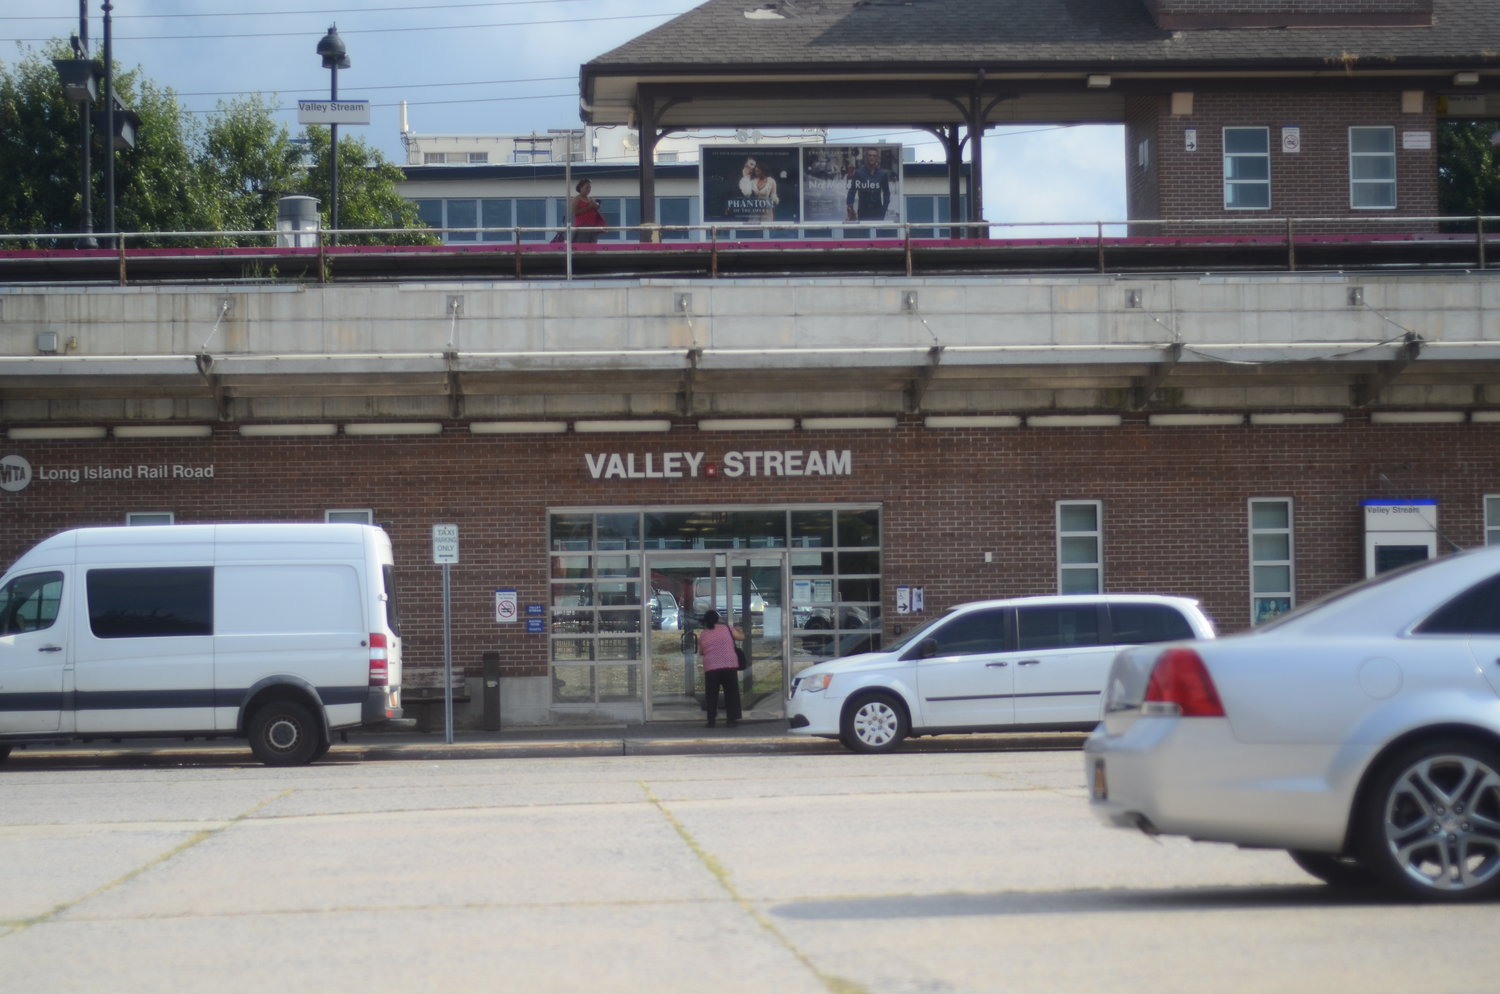 The Village of Valley Stream secured $1.7 million worth of state funding to build a network of pathways for pedestrians and cyclists running through Edward W. Cahill Memorial Park, which will connect with the Long Island Rail Road.